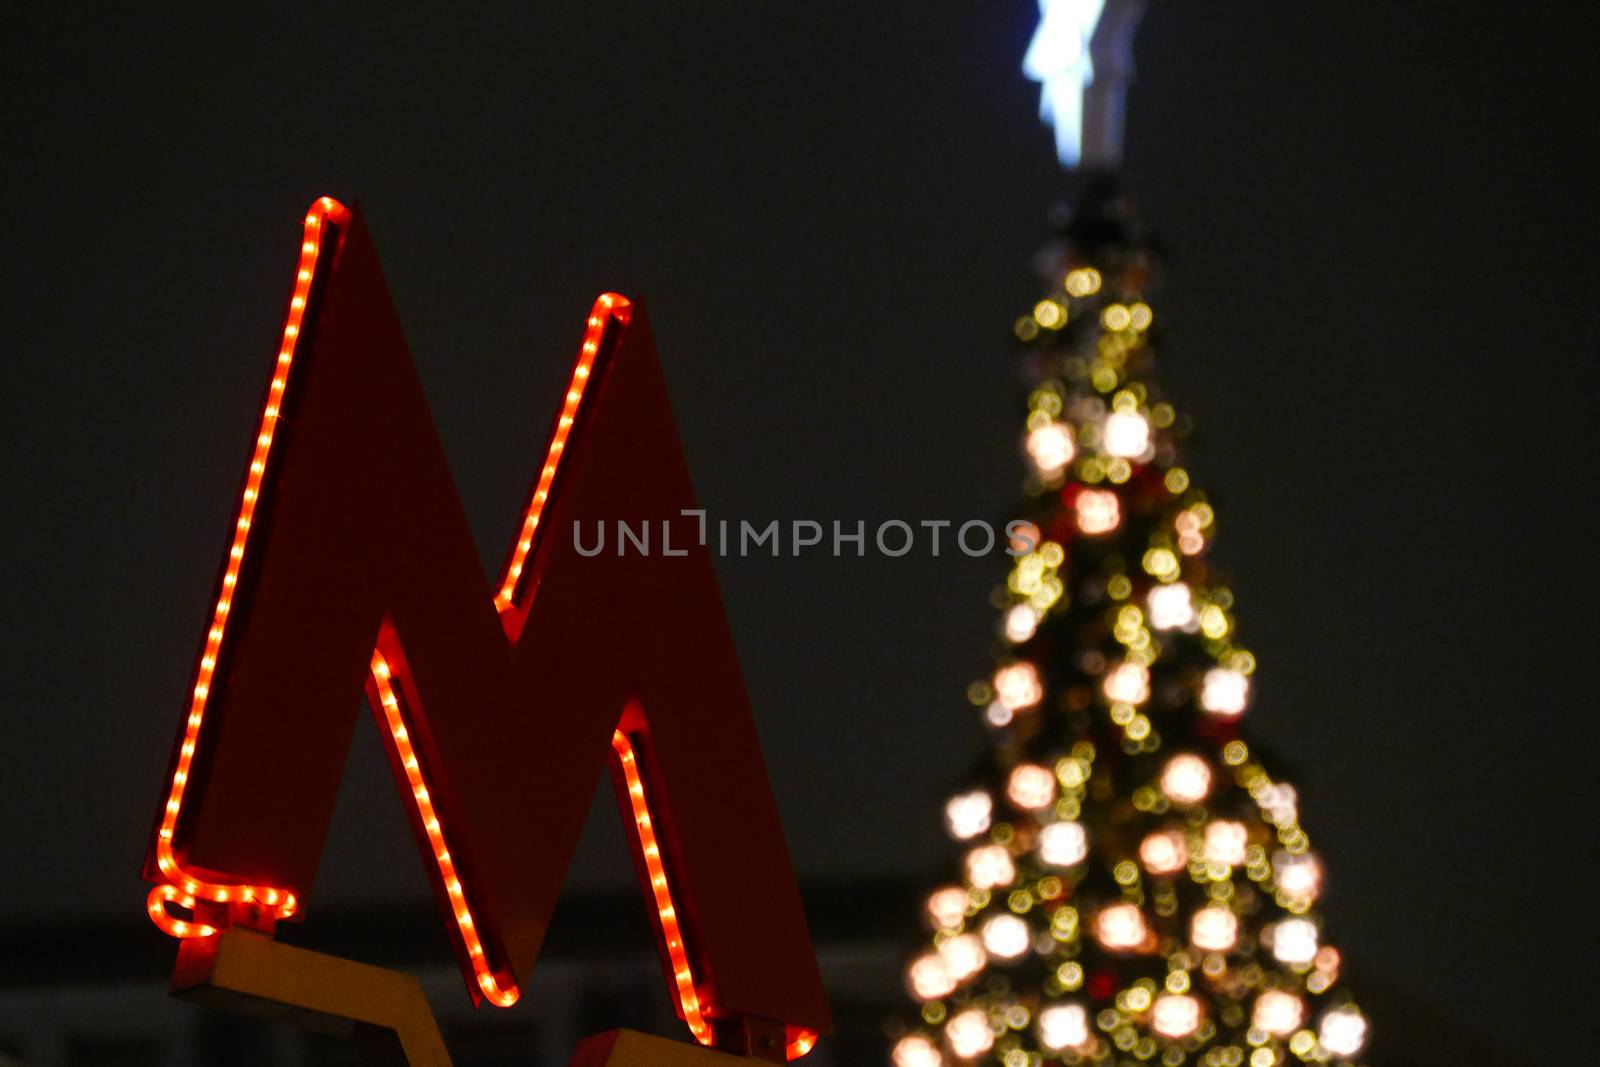 M symbol of the underground against the backdrop of the Christmas tree by L86